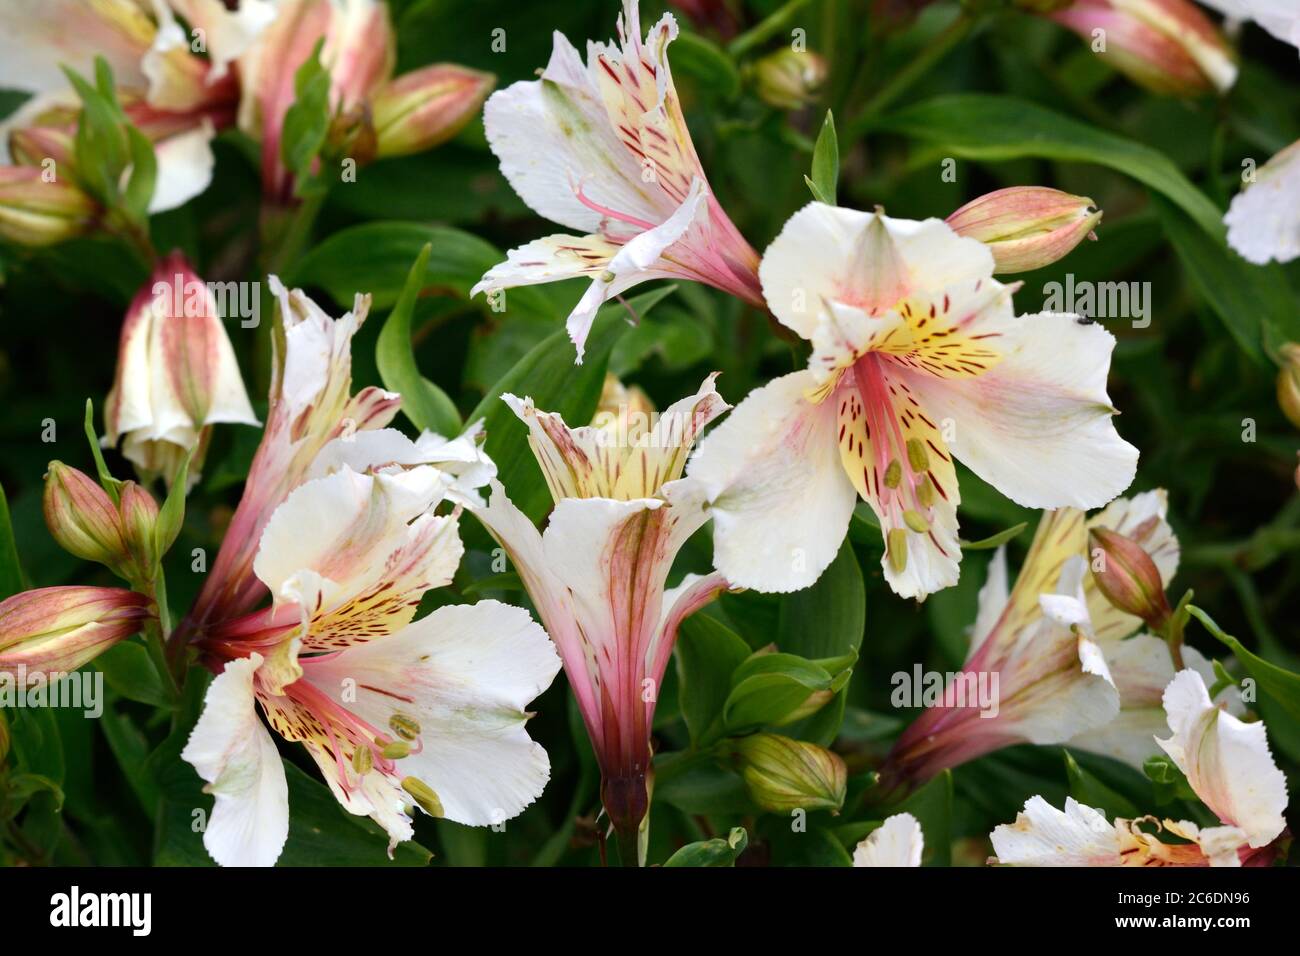 Alstroemeria Blushing Bride flowers Peruvian Lily Lily of the Incas Stock Photo